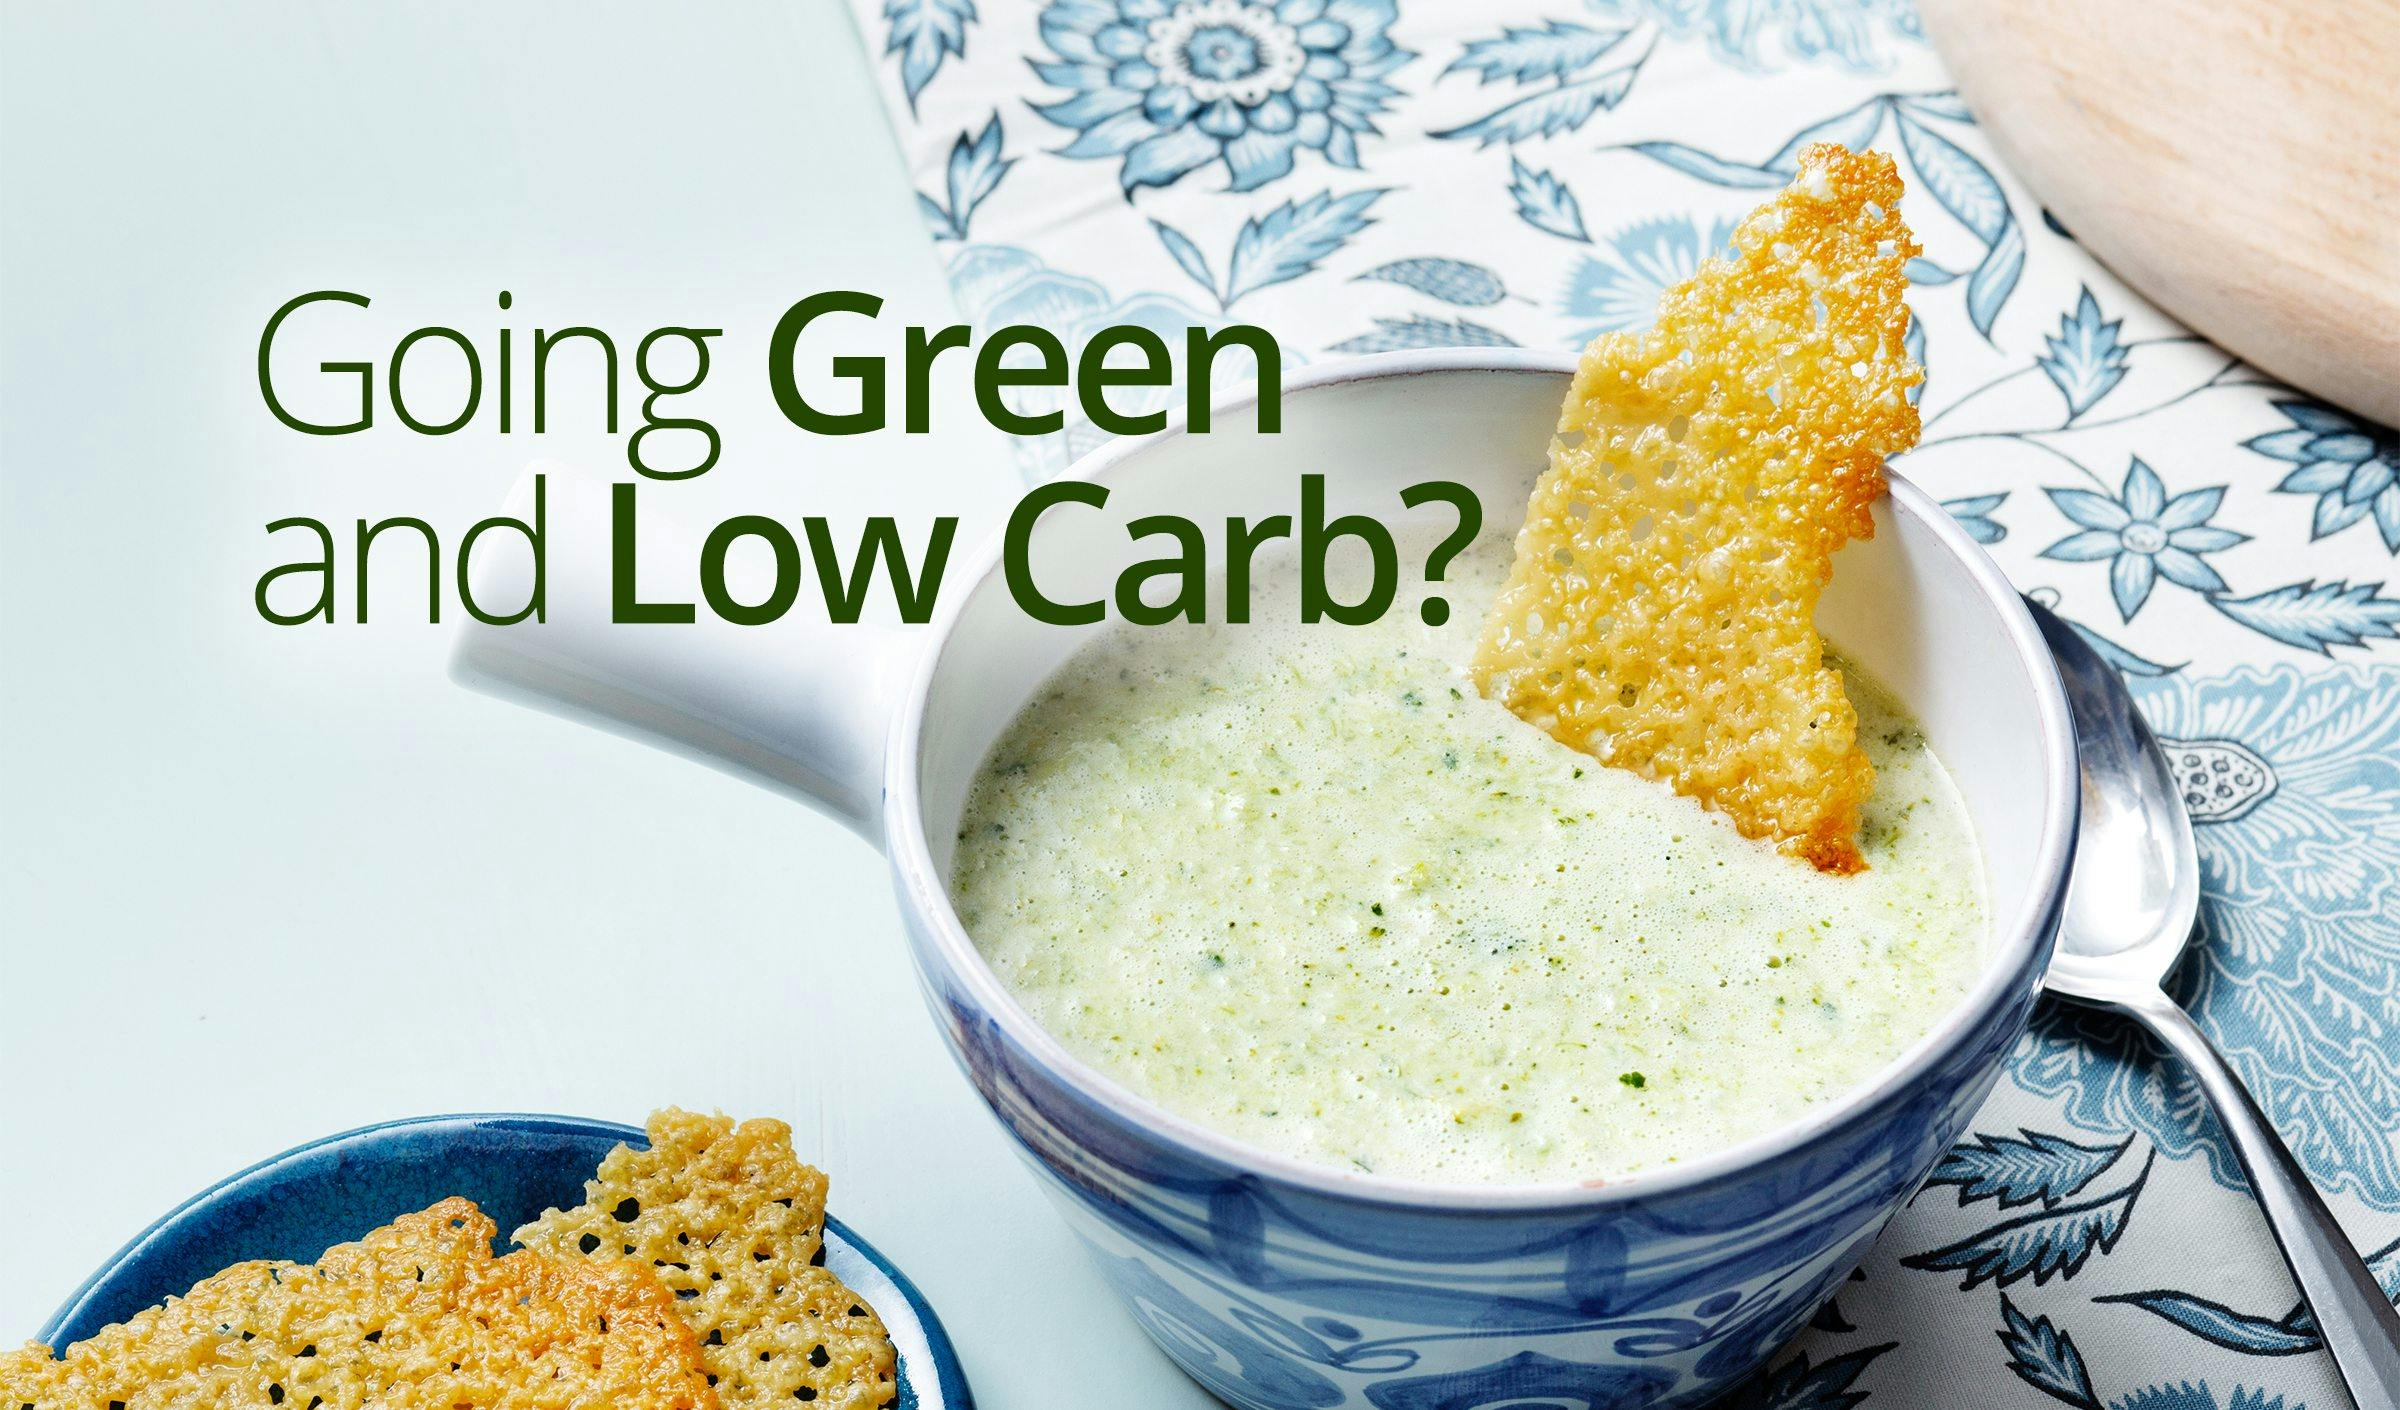 Going Green and Low Carb